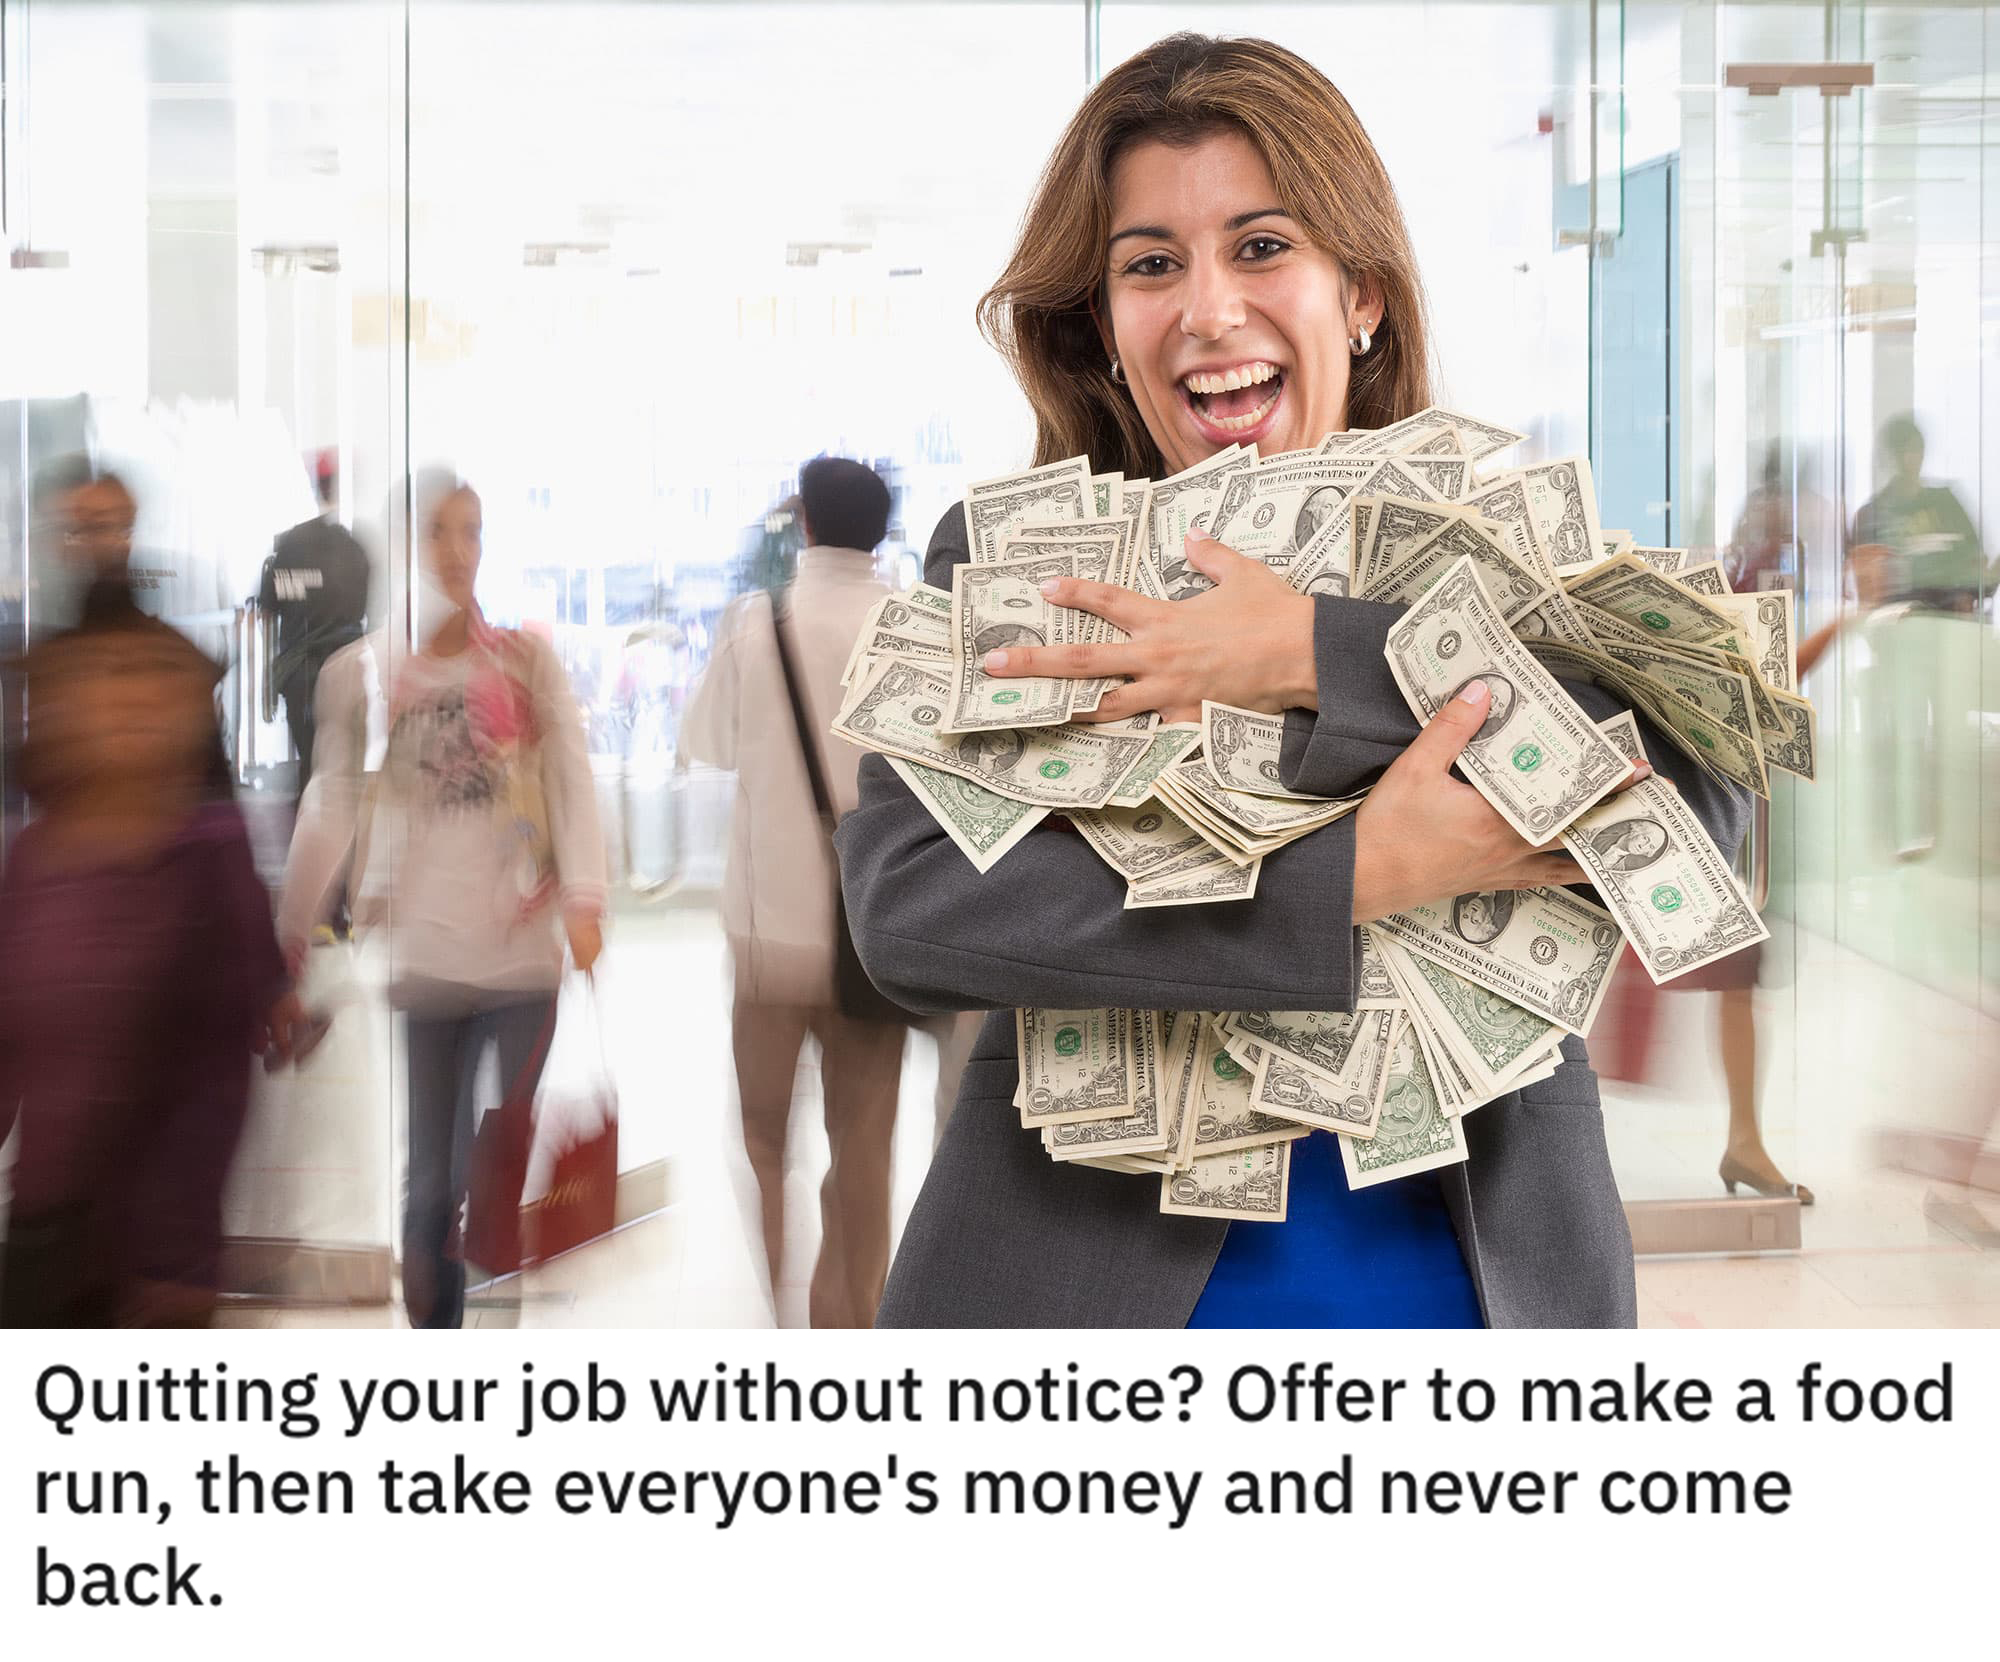 funny dumb life hacks - Quitting your job without notice? Offer to make a food run, then take everyone's money and never come back.